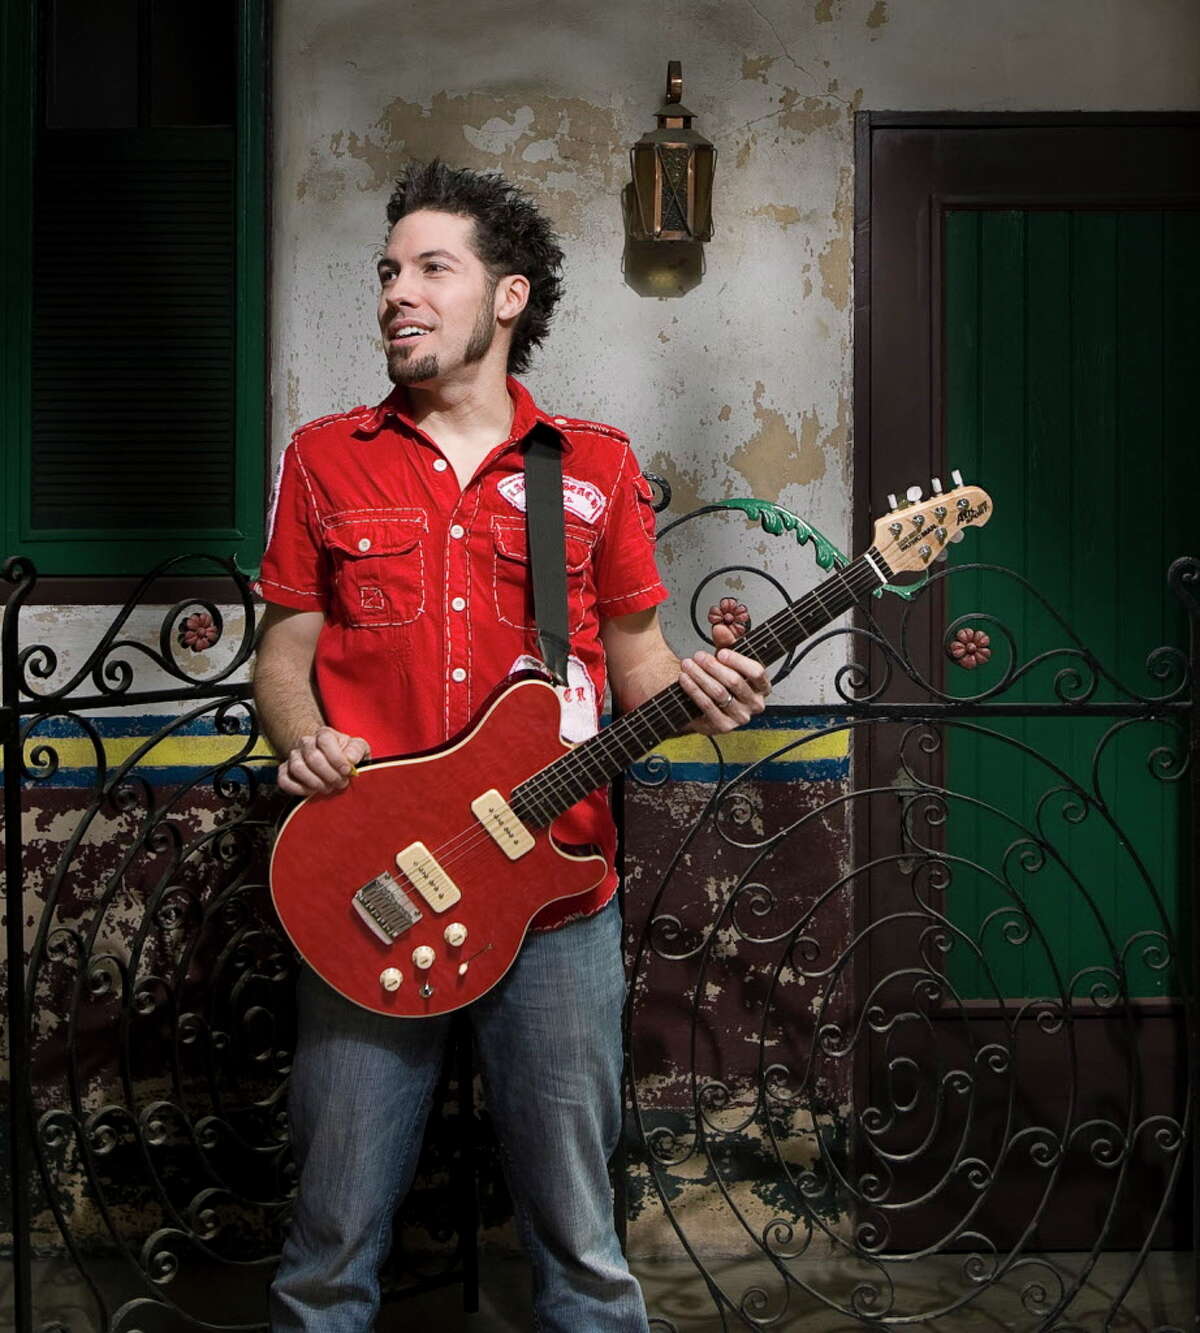 Hamilton Loomis performs June 4 at the Haak Winery in Gavleston County as a part of the winery's summer concert series.